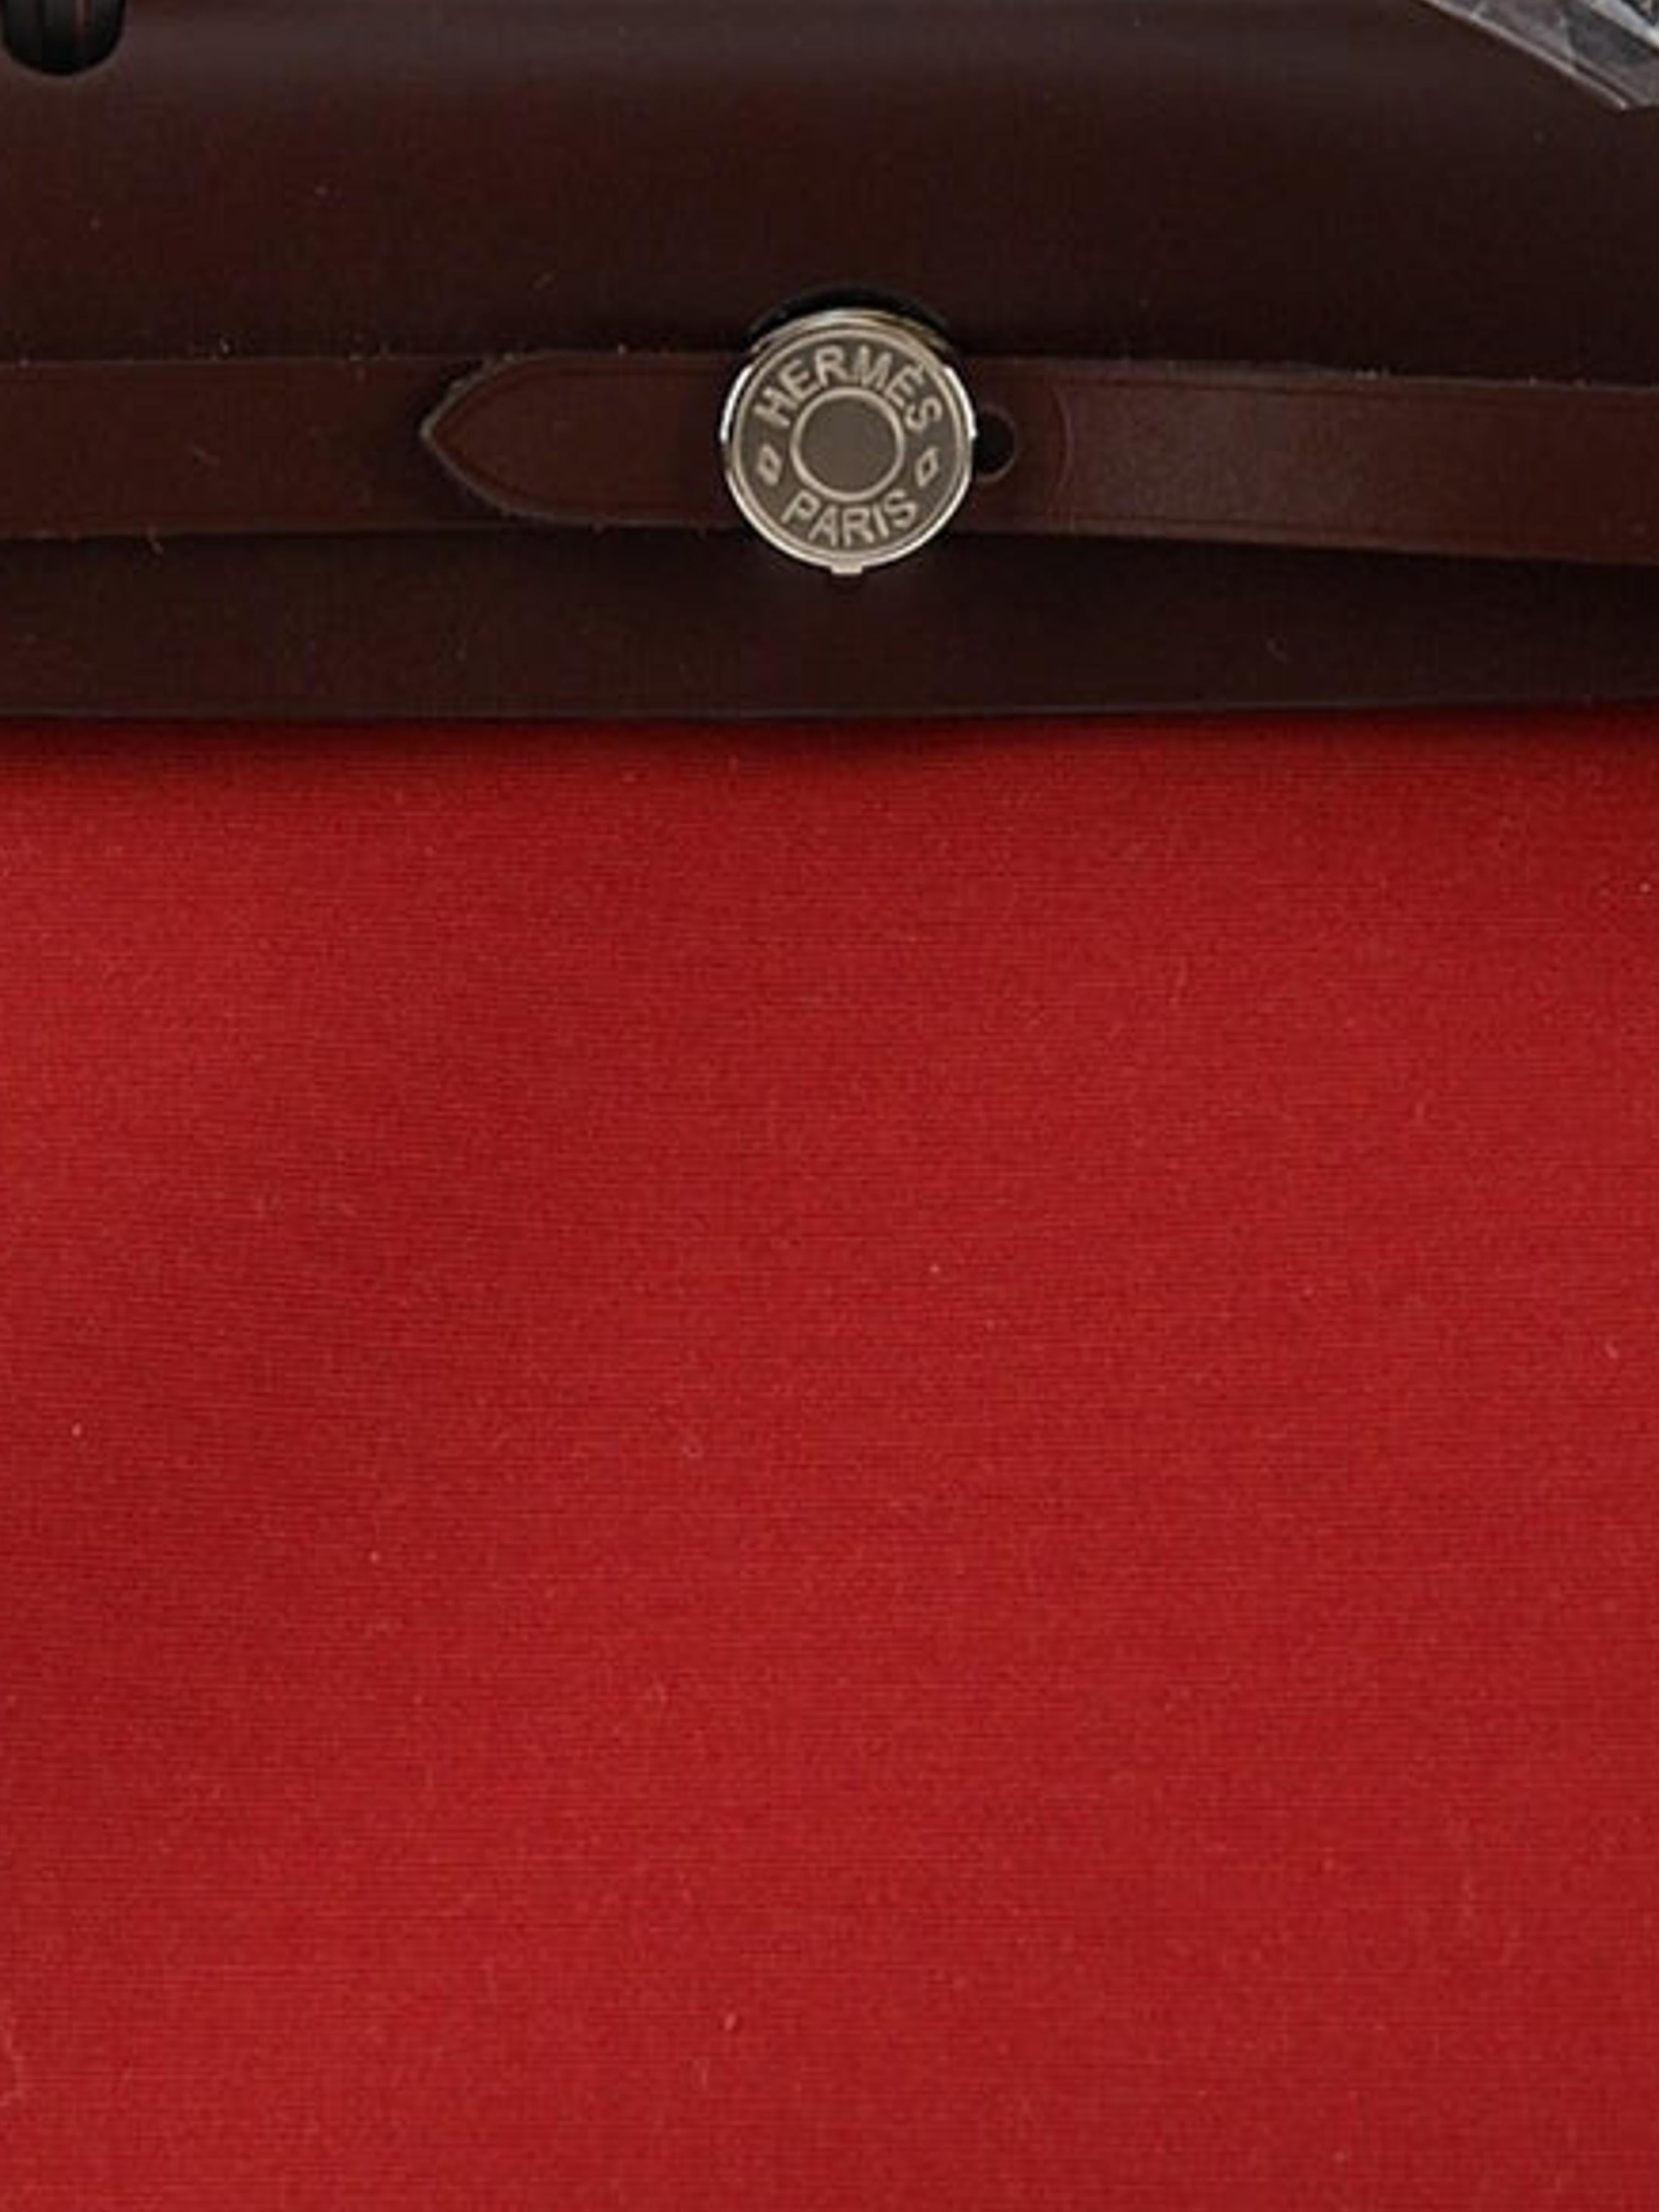 Hermès Herbag 31cm in Rouge Grenat, Rouge Sellier and Rose Extreme

Canvas & Vache Hunter Leather with Palladium Hardware

B Stamp / 2023

Accompanied by: Original receipt, Hermes box, dustbag, clochette, lock, two keys, clochette dustbag, zip pouch